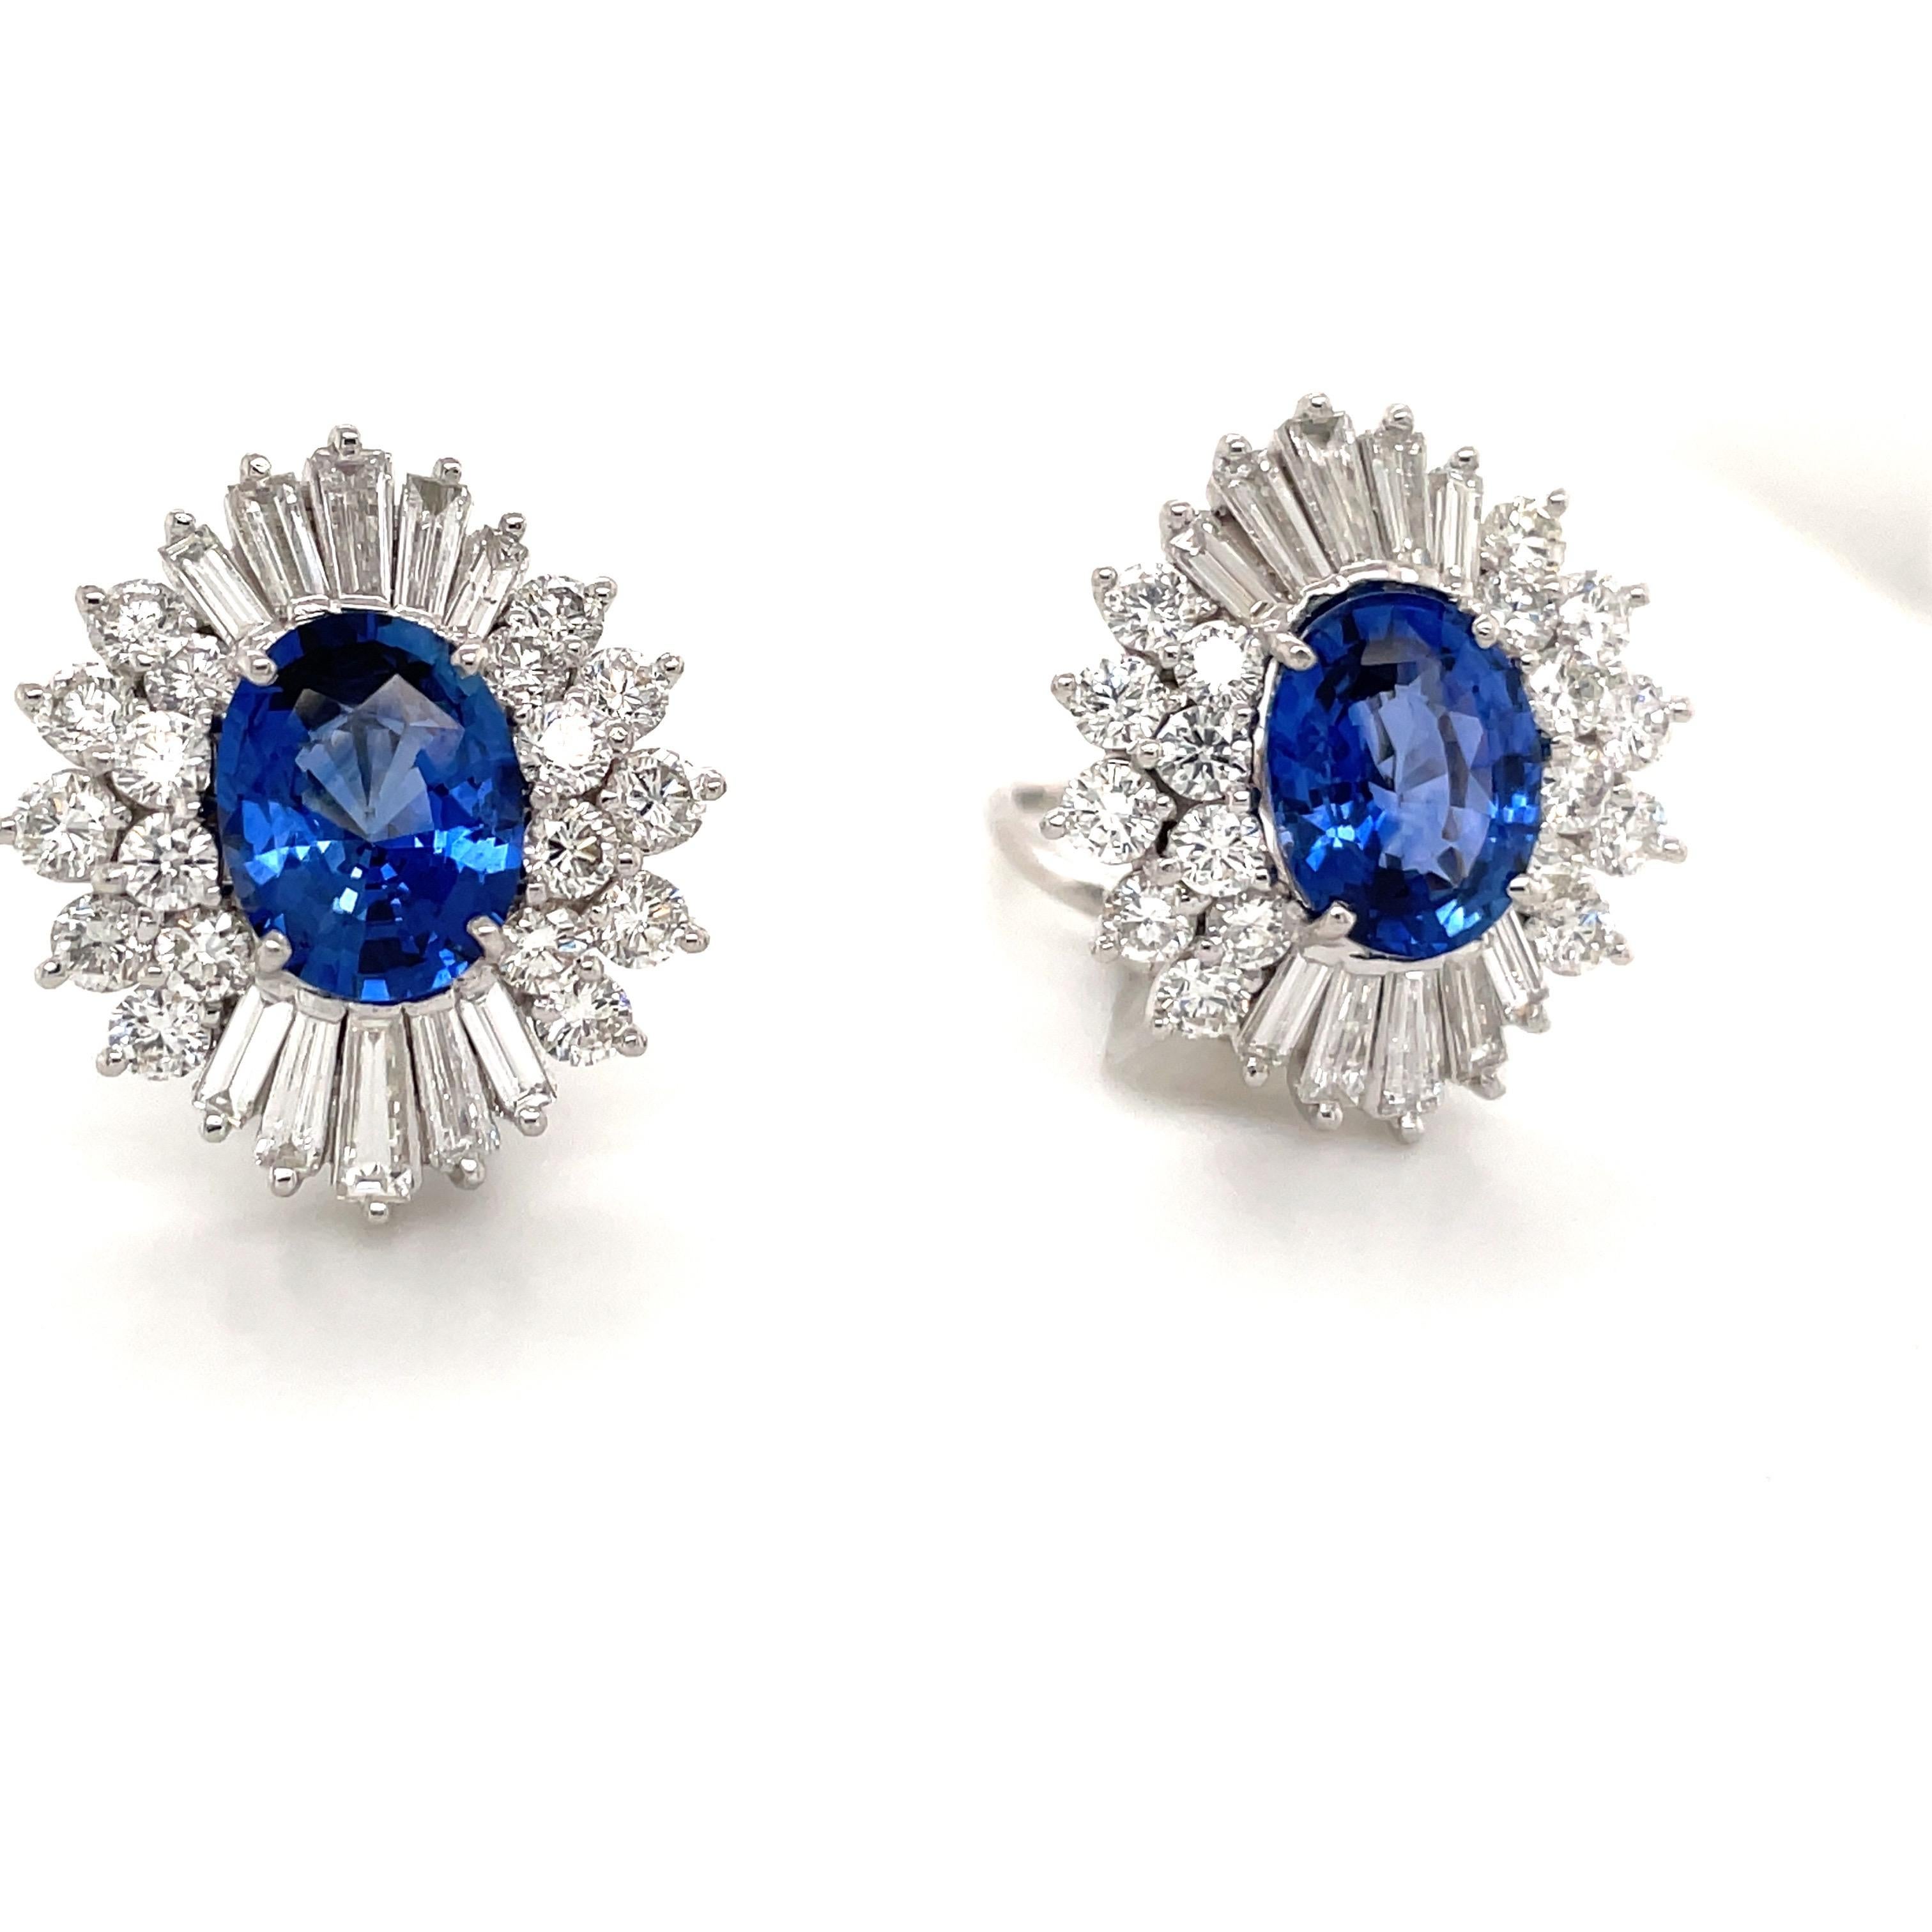 Impressive stud earrings featuring two oval shape blue Sapphires weighing 6.66 carats flanked with a cluster of round brilliants and tapered baguettes weighing 6 carats.
Color G-H
Clarity VS-SI

Gorgeous Sapphire color.
Can add post. 